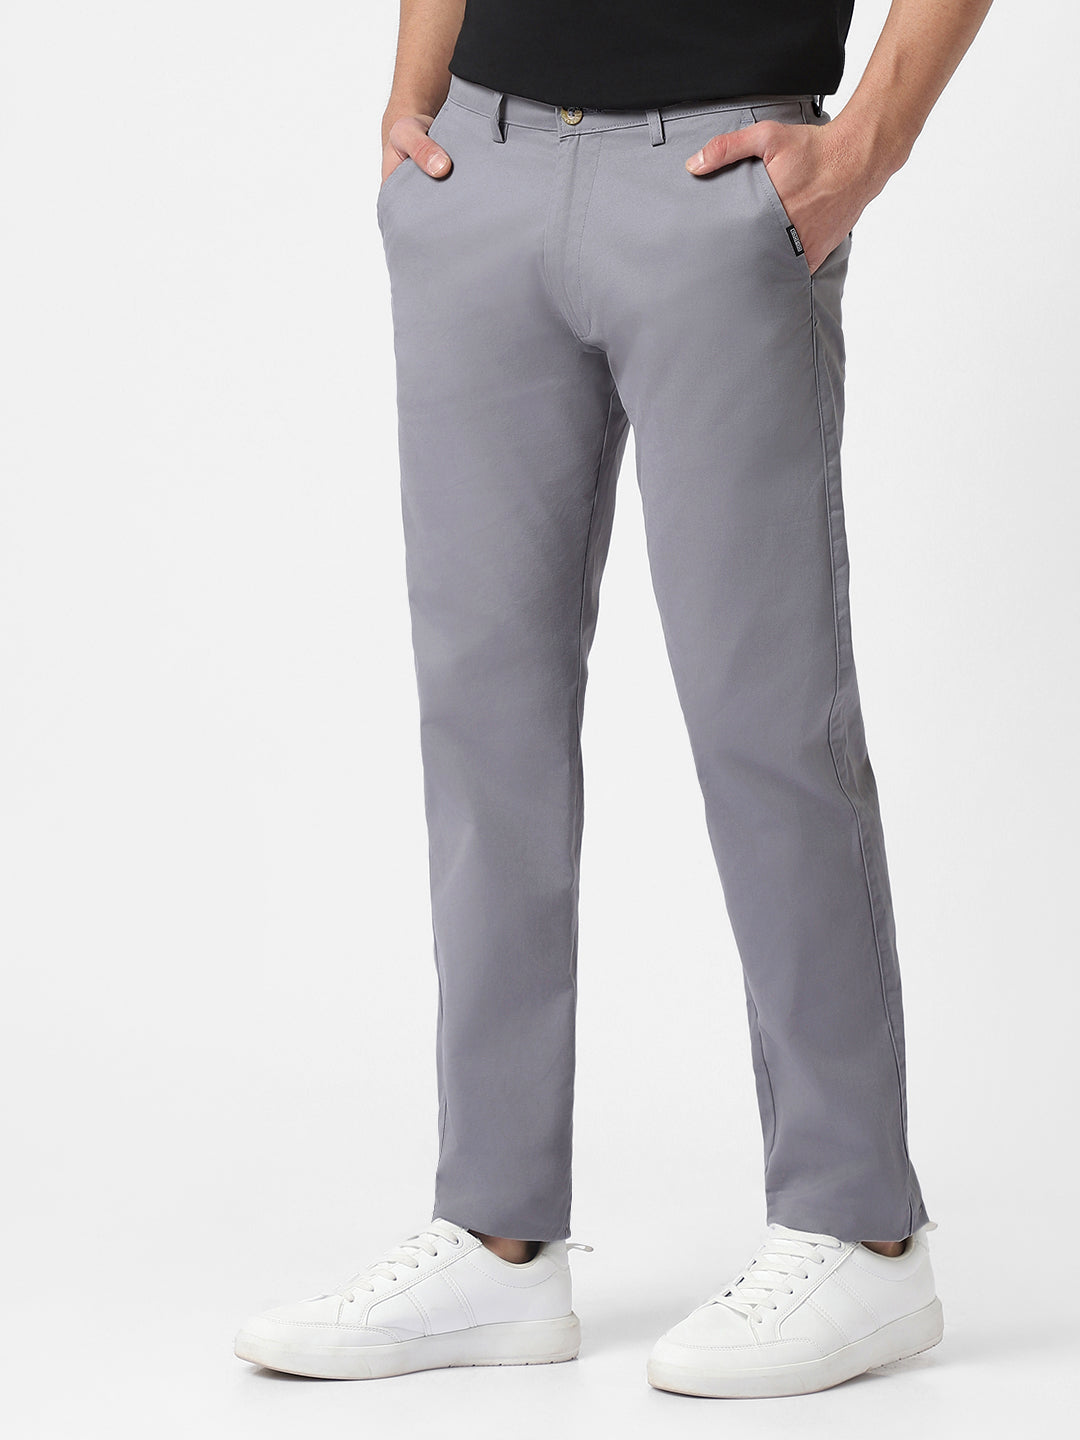 Men's Light Blue Cotton Slim Fit Casual Chinos Trousers Stretch